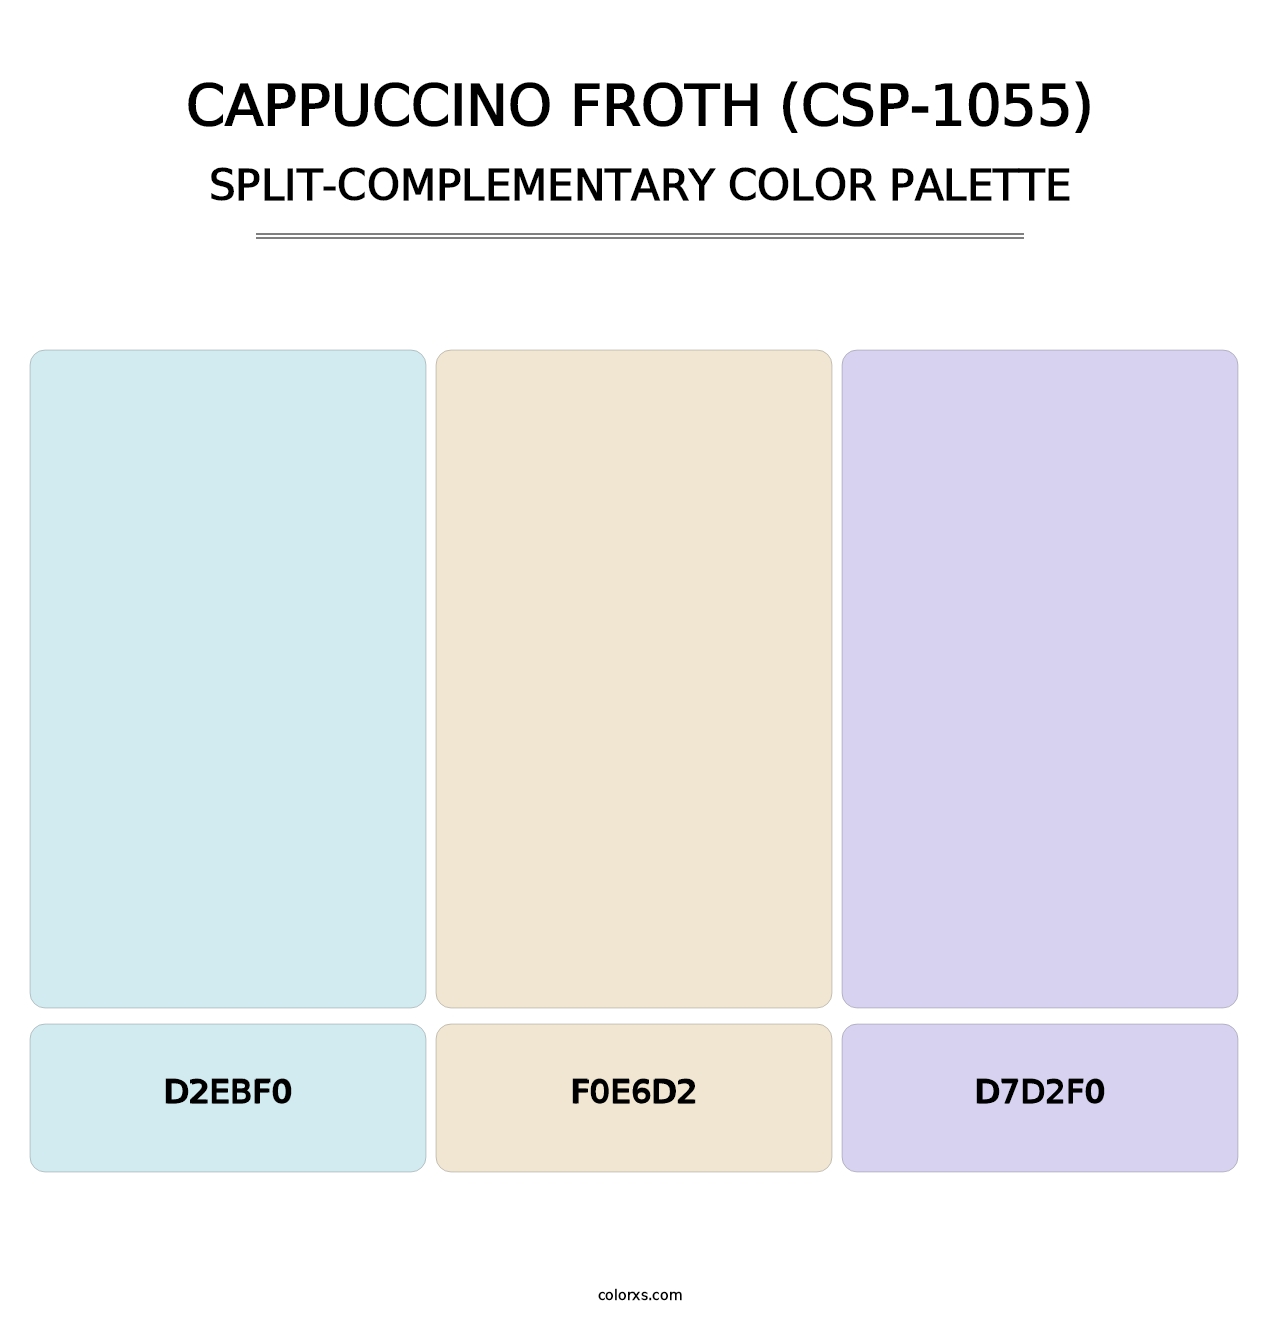 Cappuccino Froth (CSP-1055) - Split-Complementary Color Palette